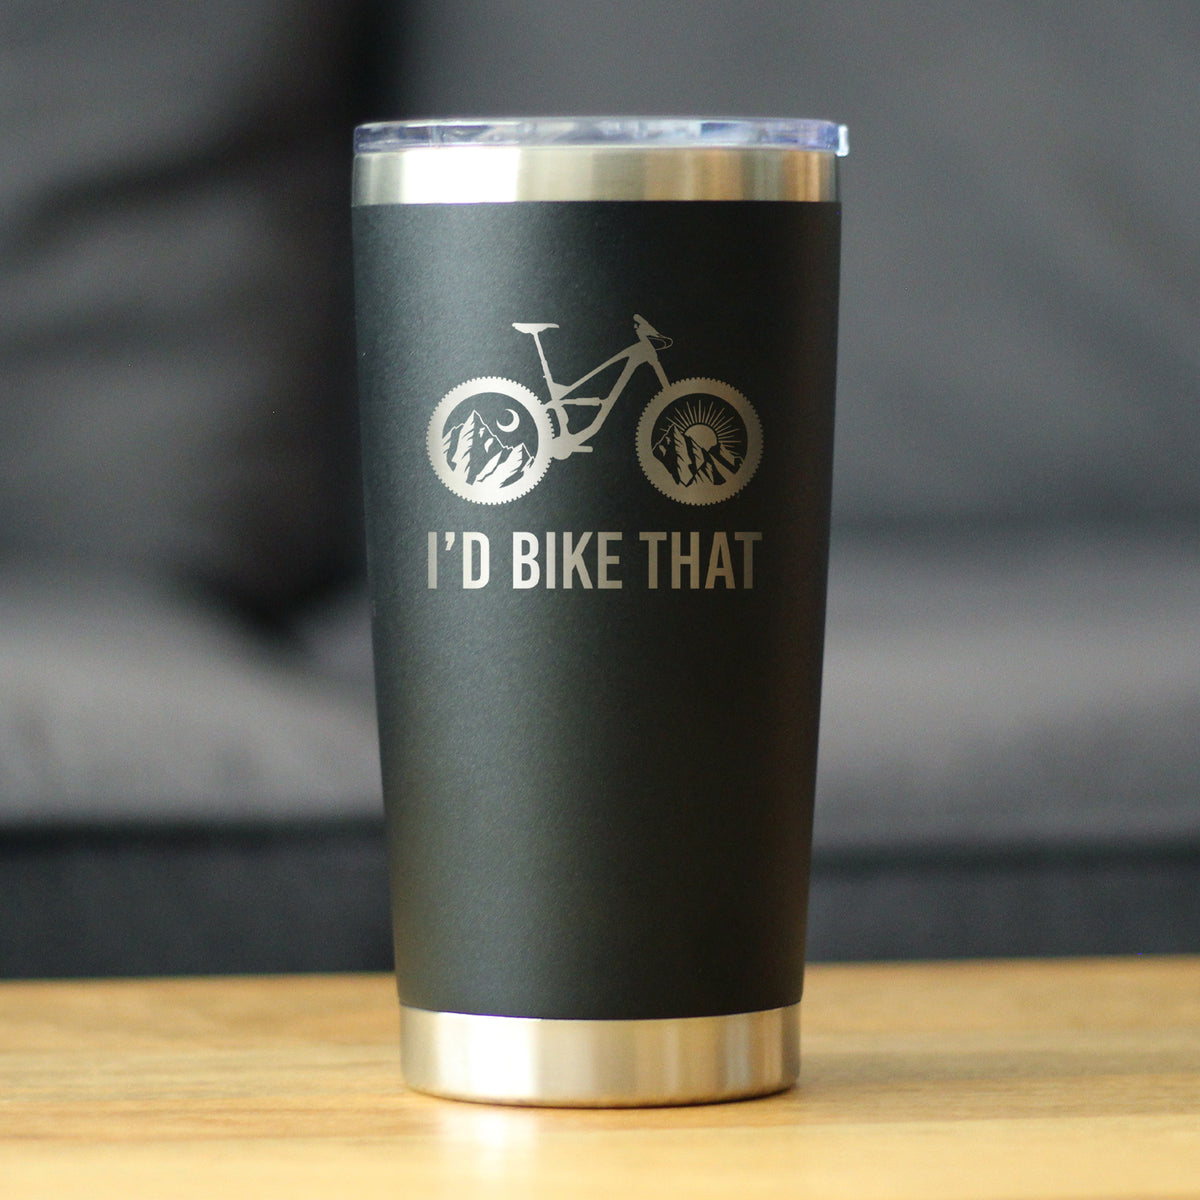 I&#39;d Bike That - Insulated Coffee Tumbler Cup with Sliding Lid - Stainless Steel Insulated Mug - Cool Bicycle Themed Decor and Gifts for Mountain Bikers